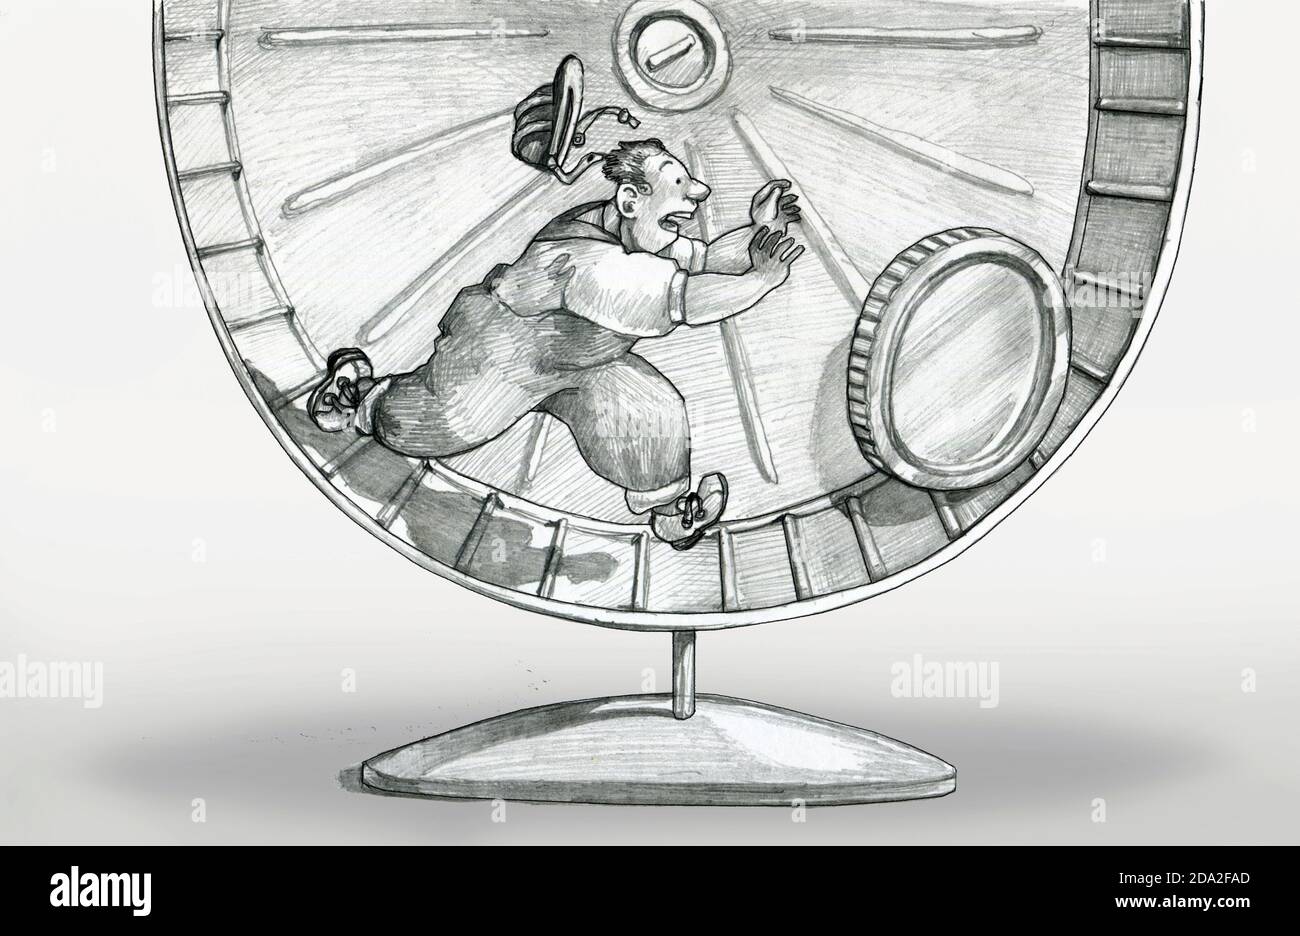 worker inside hamster wheel chasing coin never reachesit because it moves with him political cartoon pencil black and white draw Stock Photo